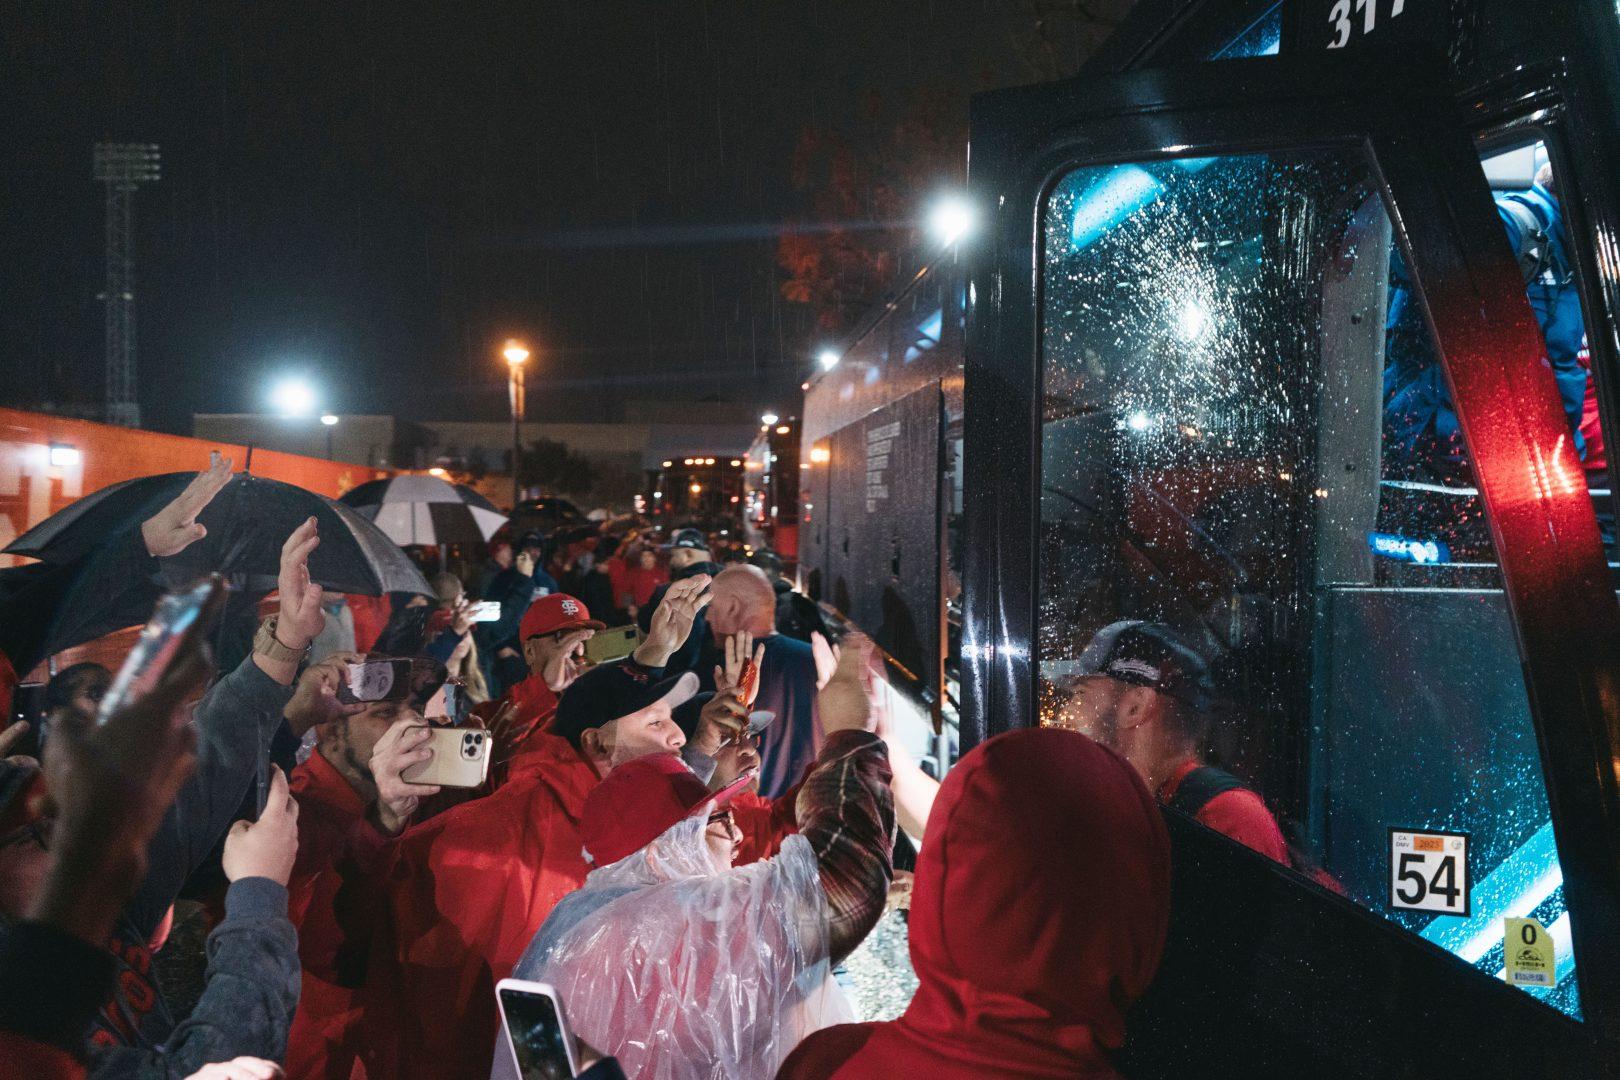 As the rain continued, the fans rushed to the busses to congratulate the team as soon as they stepped out. (Wyatt Bible/ The Collegian)